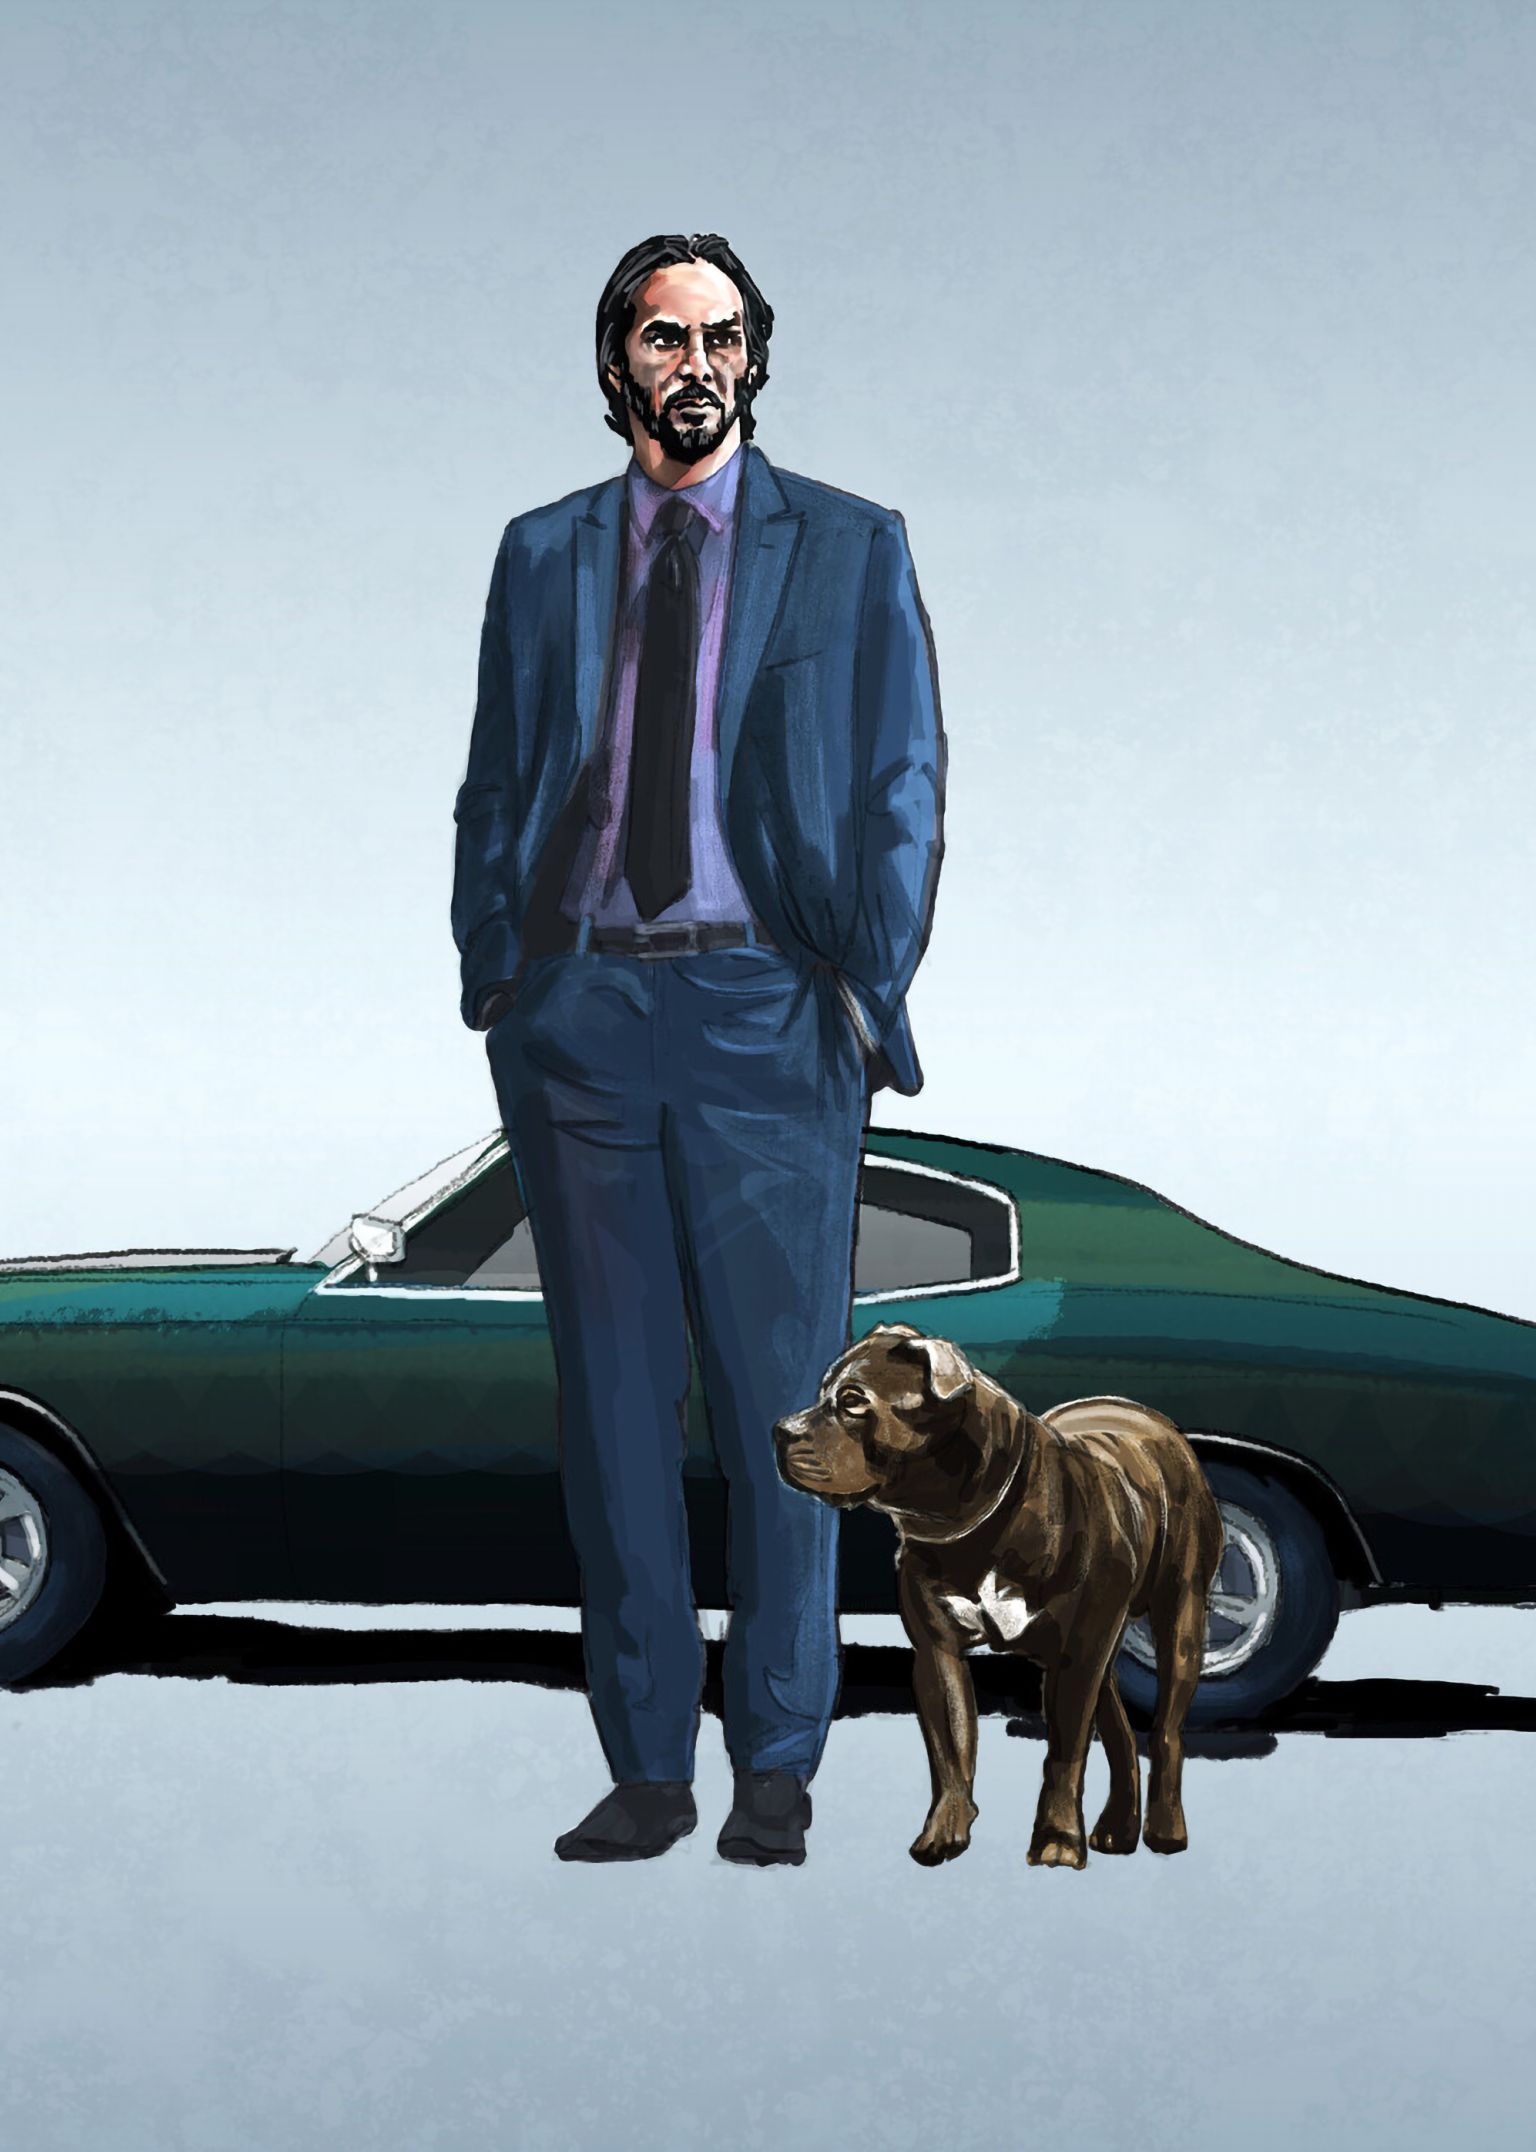 John Wick with Mustang 1536x2152 Resolution Wallpaper, HD Movies 4K Wallpaper, Image, Photo and Background